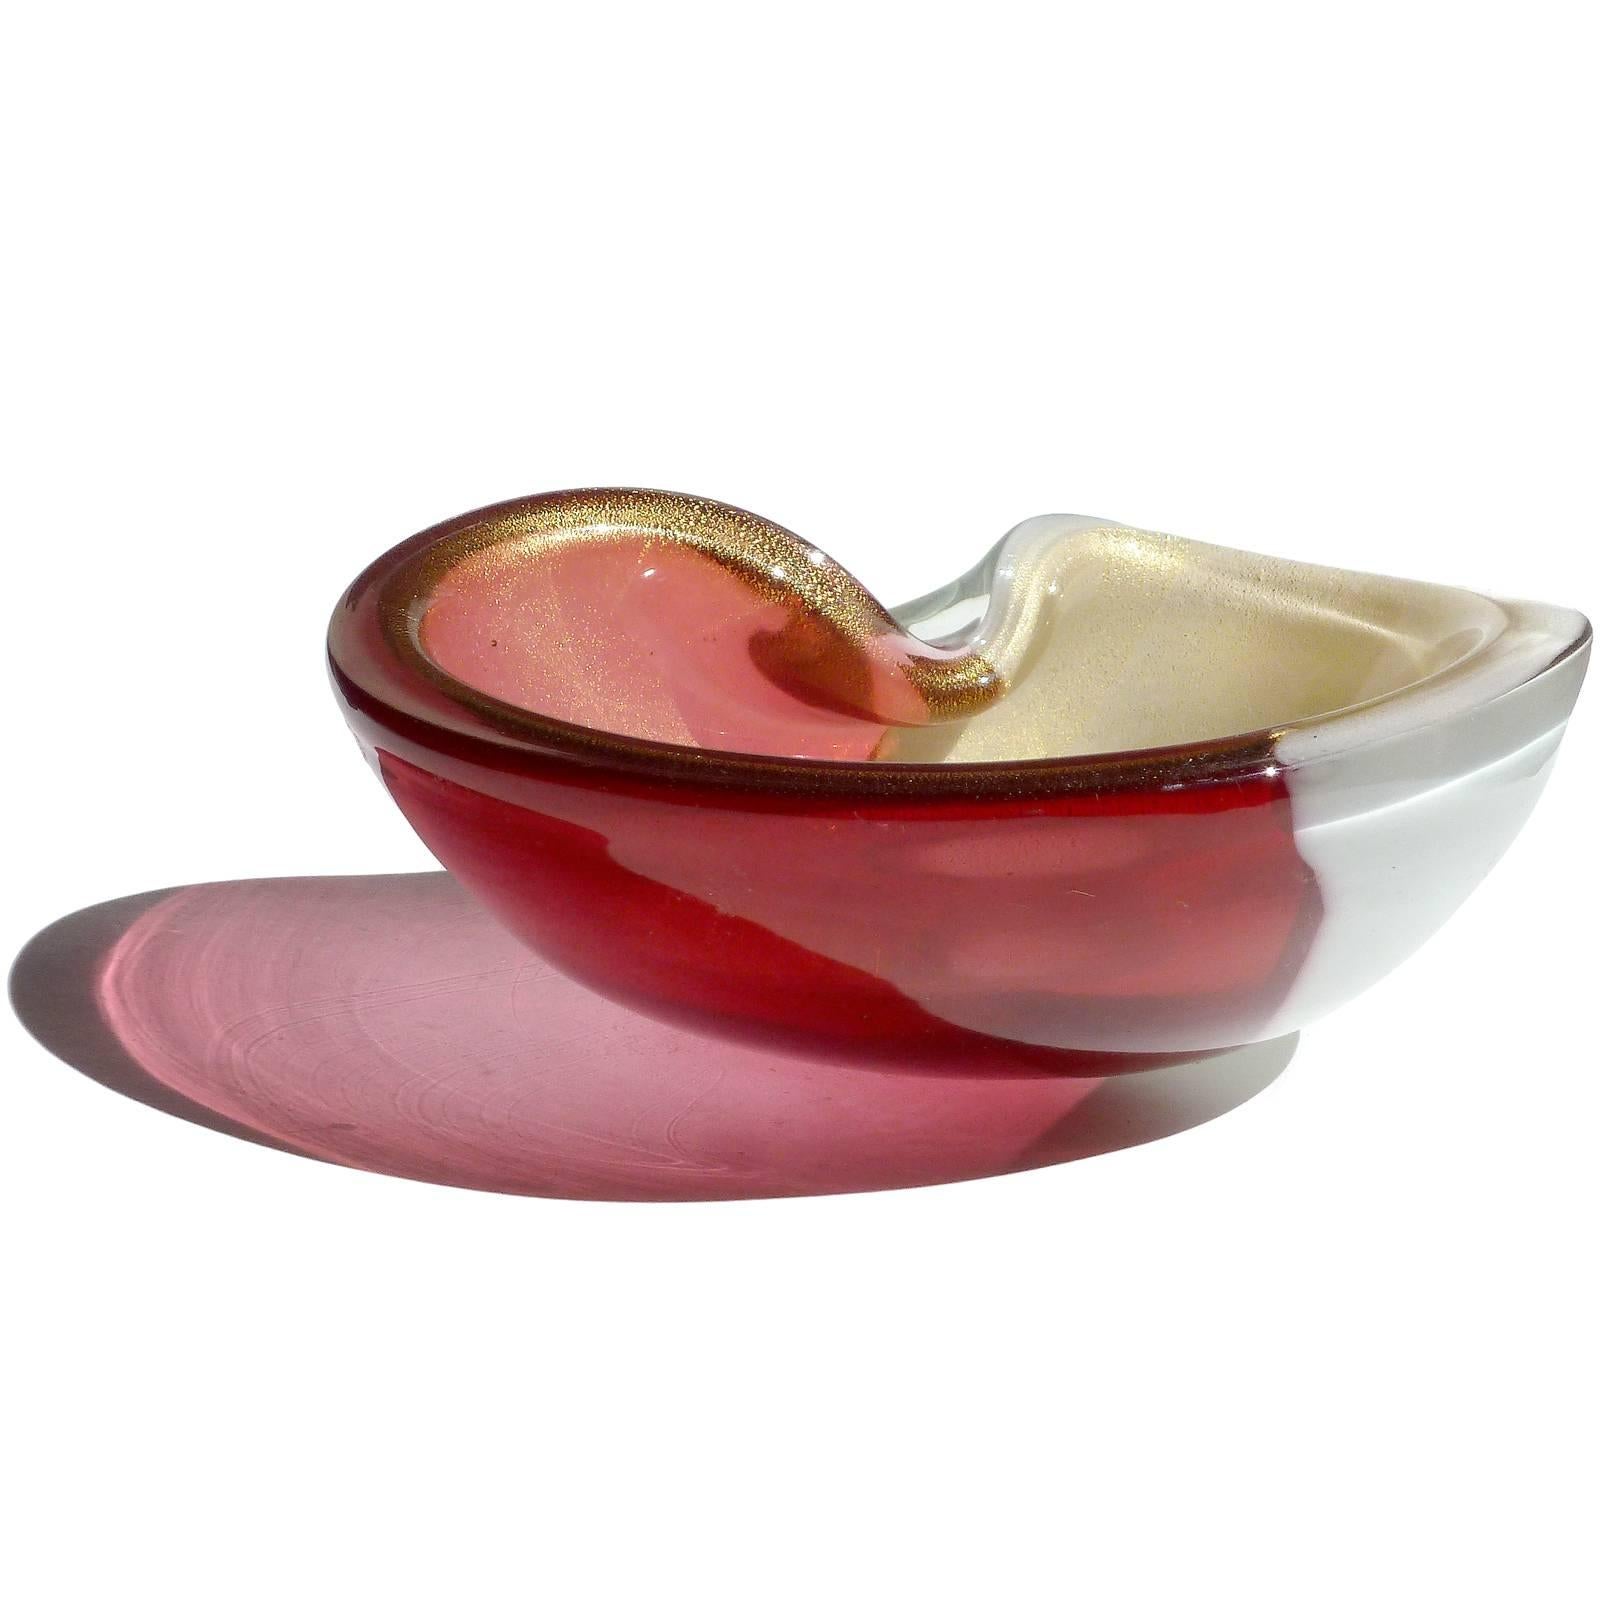 Beautiful vintage Murano hand blown Sommerso bi-color with gold flecks Italian art glass bowl in amethyst purple and white. Documented to designer Alfredo Barbini, circa 1950-1960. It has a nice sleek Eames kidney shape with decorative fold on the